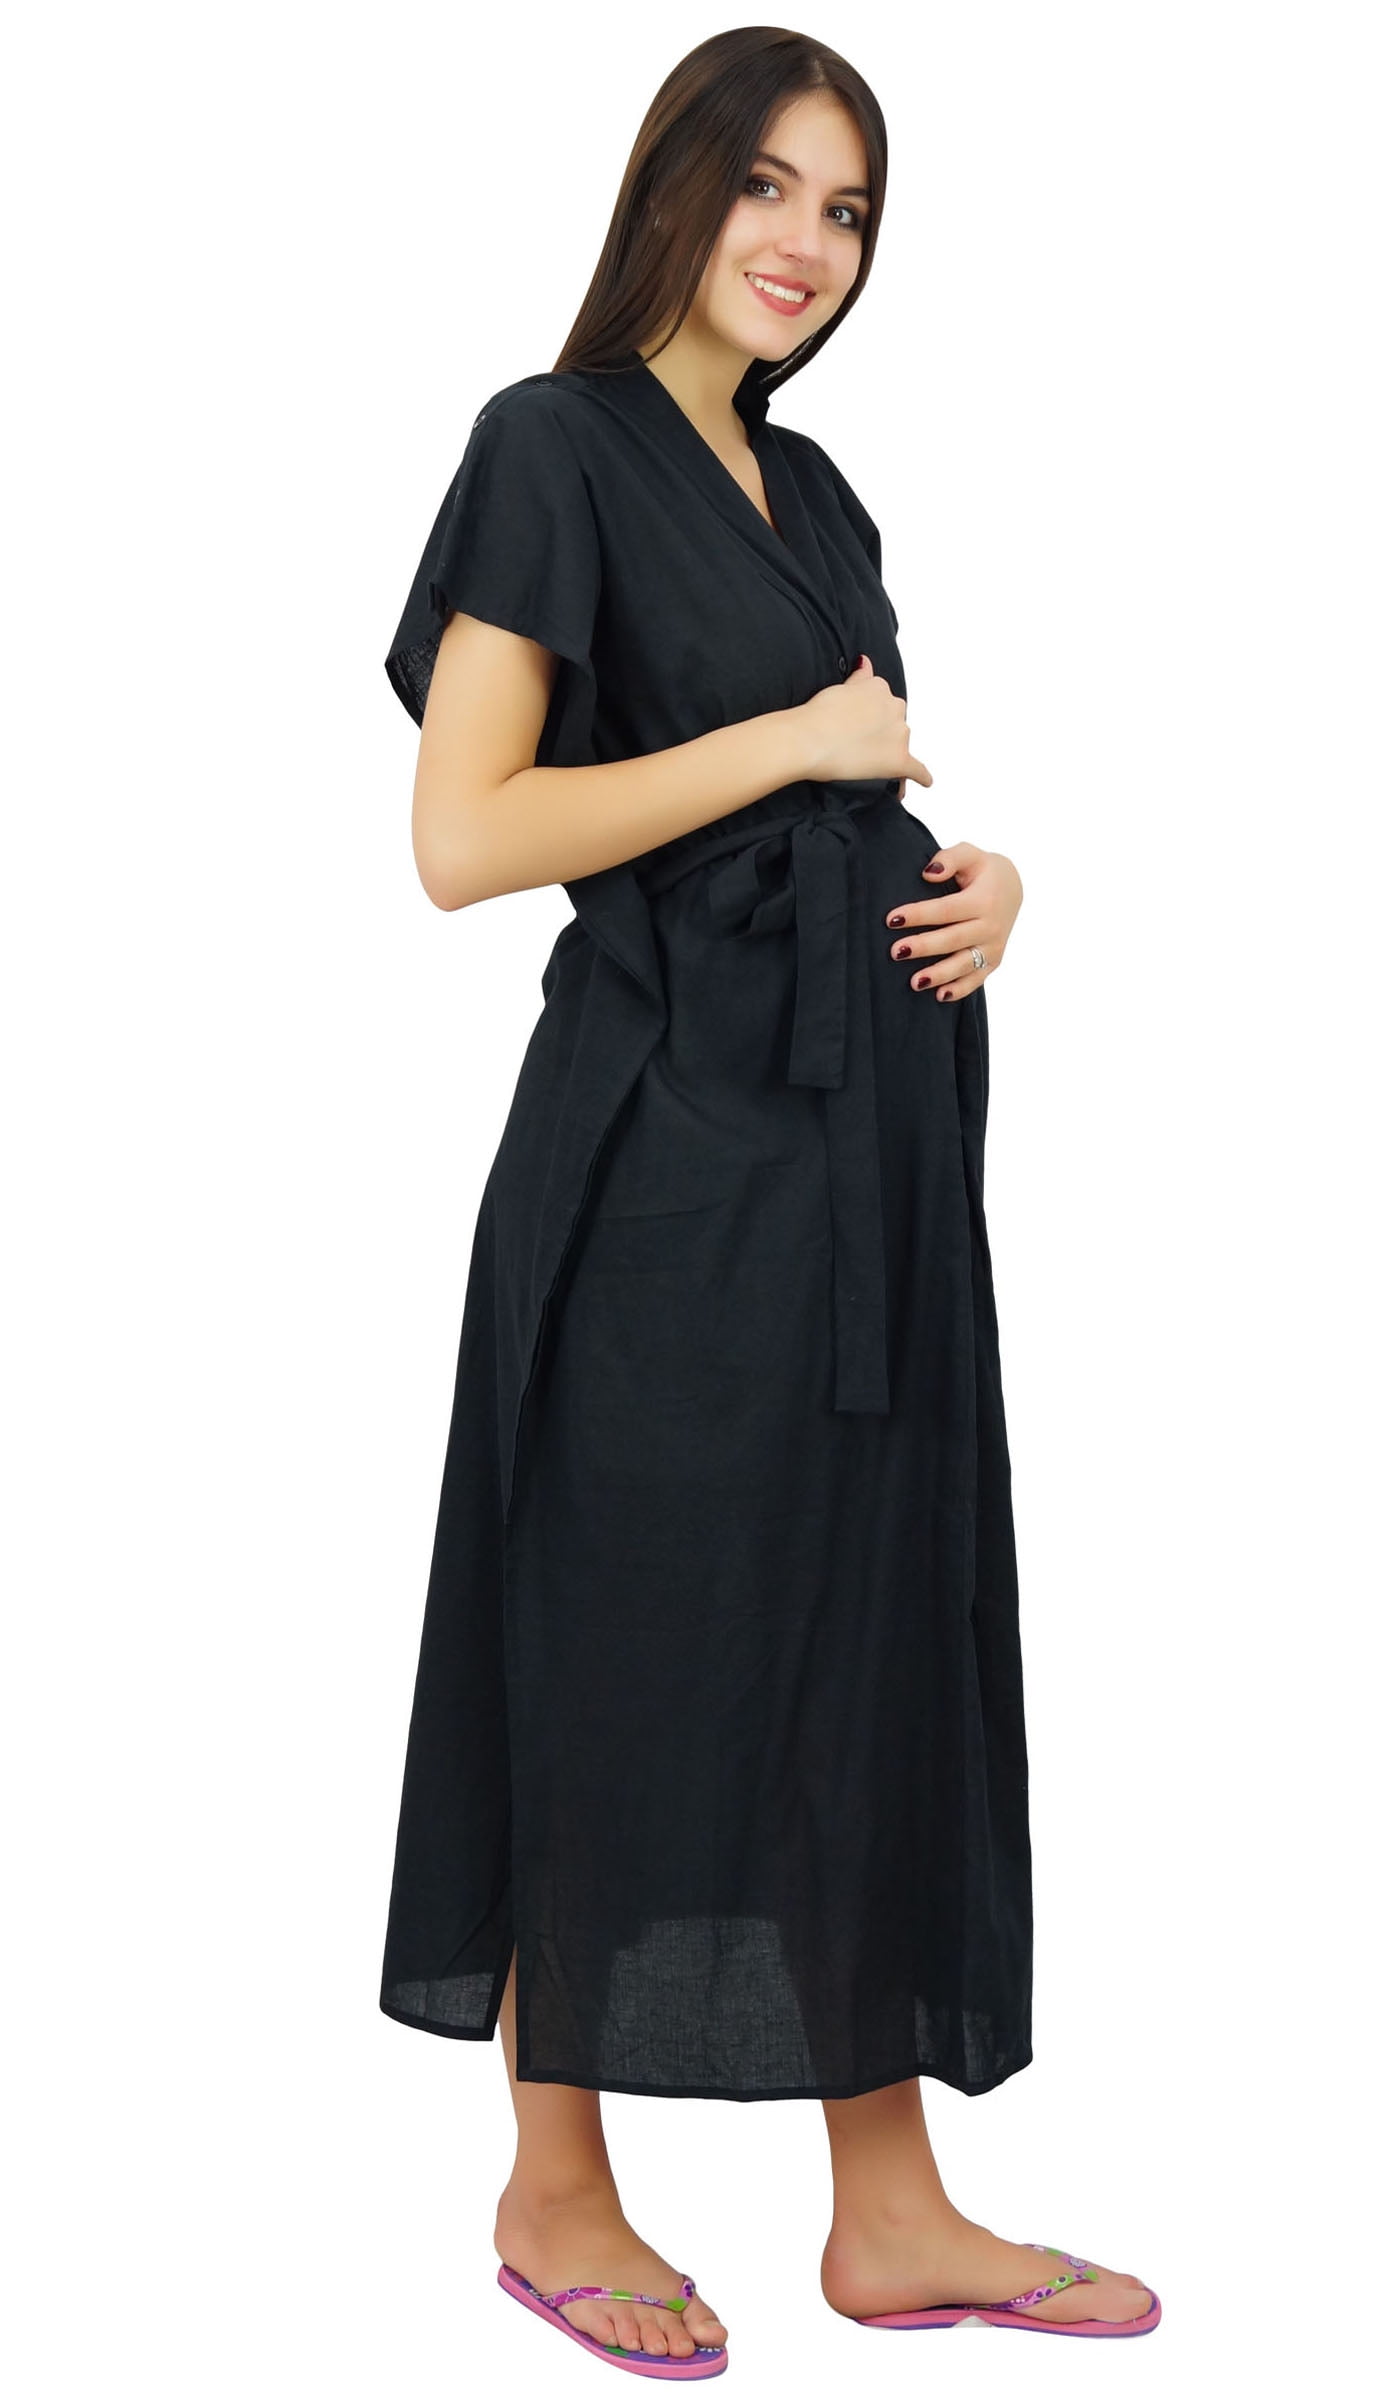 Bimba Maternity Robe Nursing Coverup with Side Shoulder Buttons